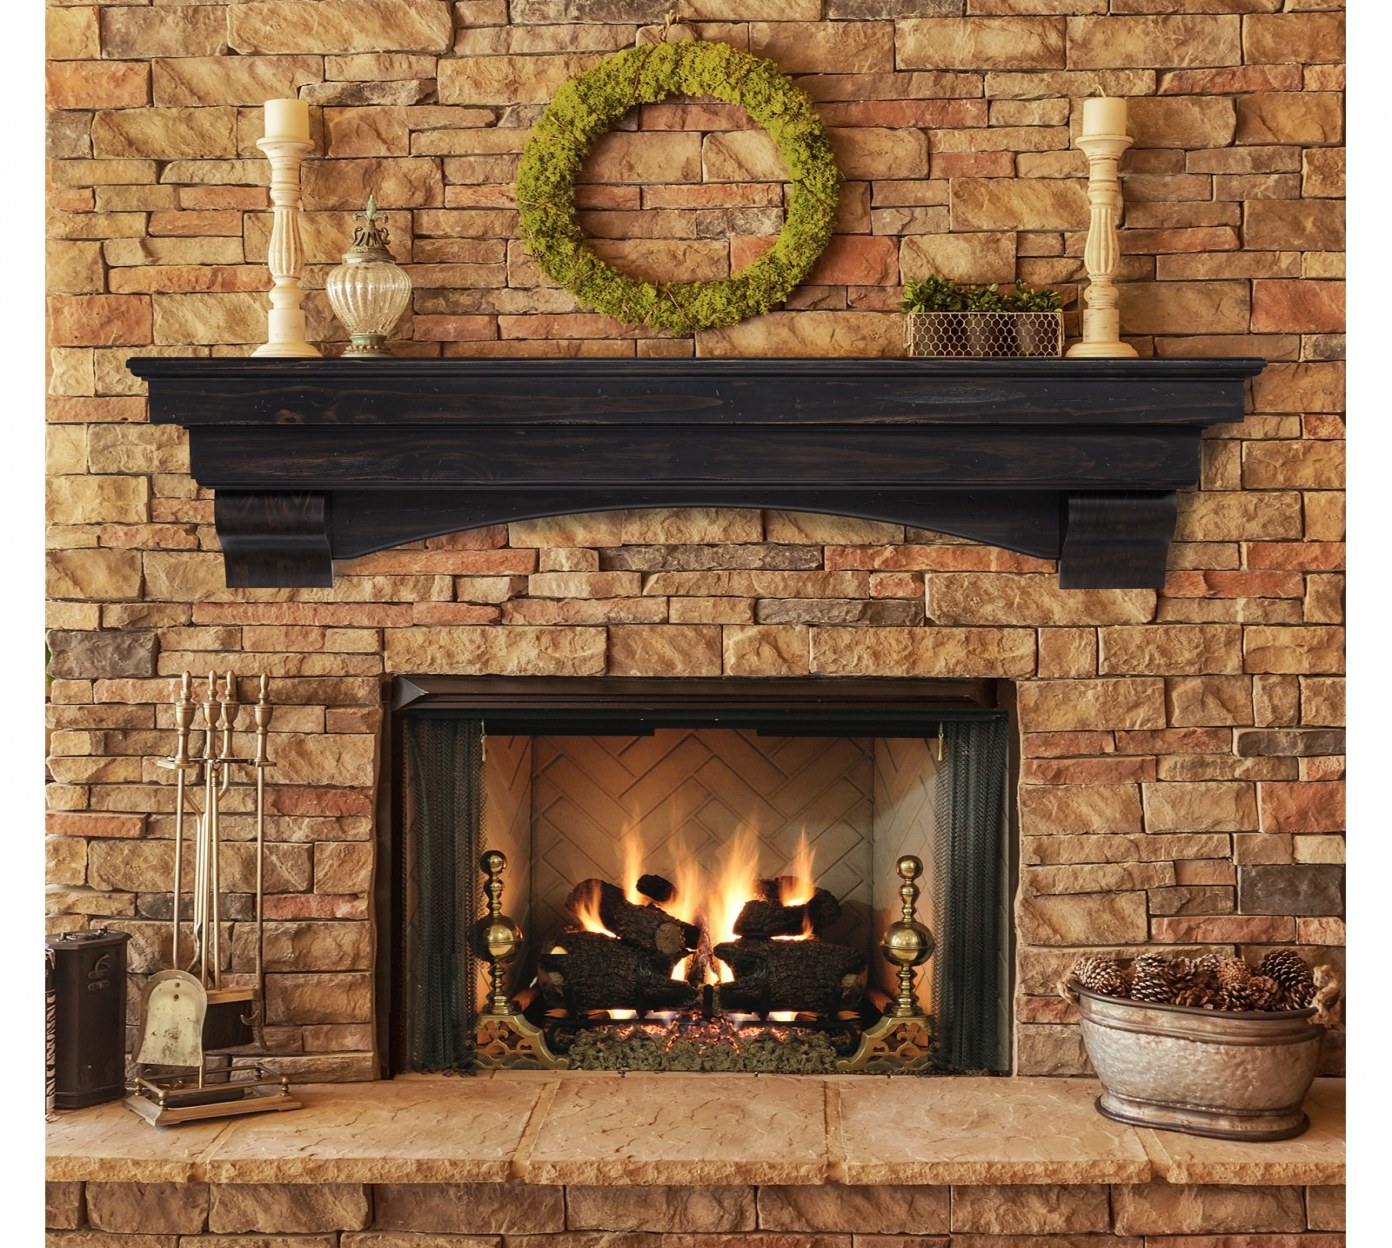 Timber Mantels for Fireplaces Lovely Fireplace Mantel Shelf Relatively Fireplace Surround with